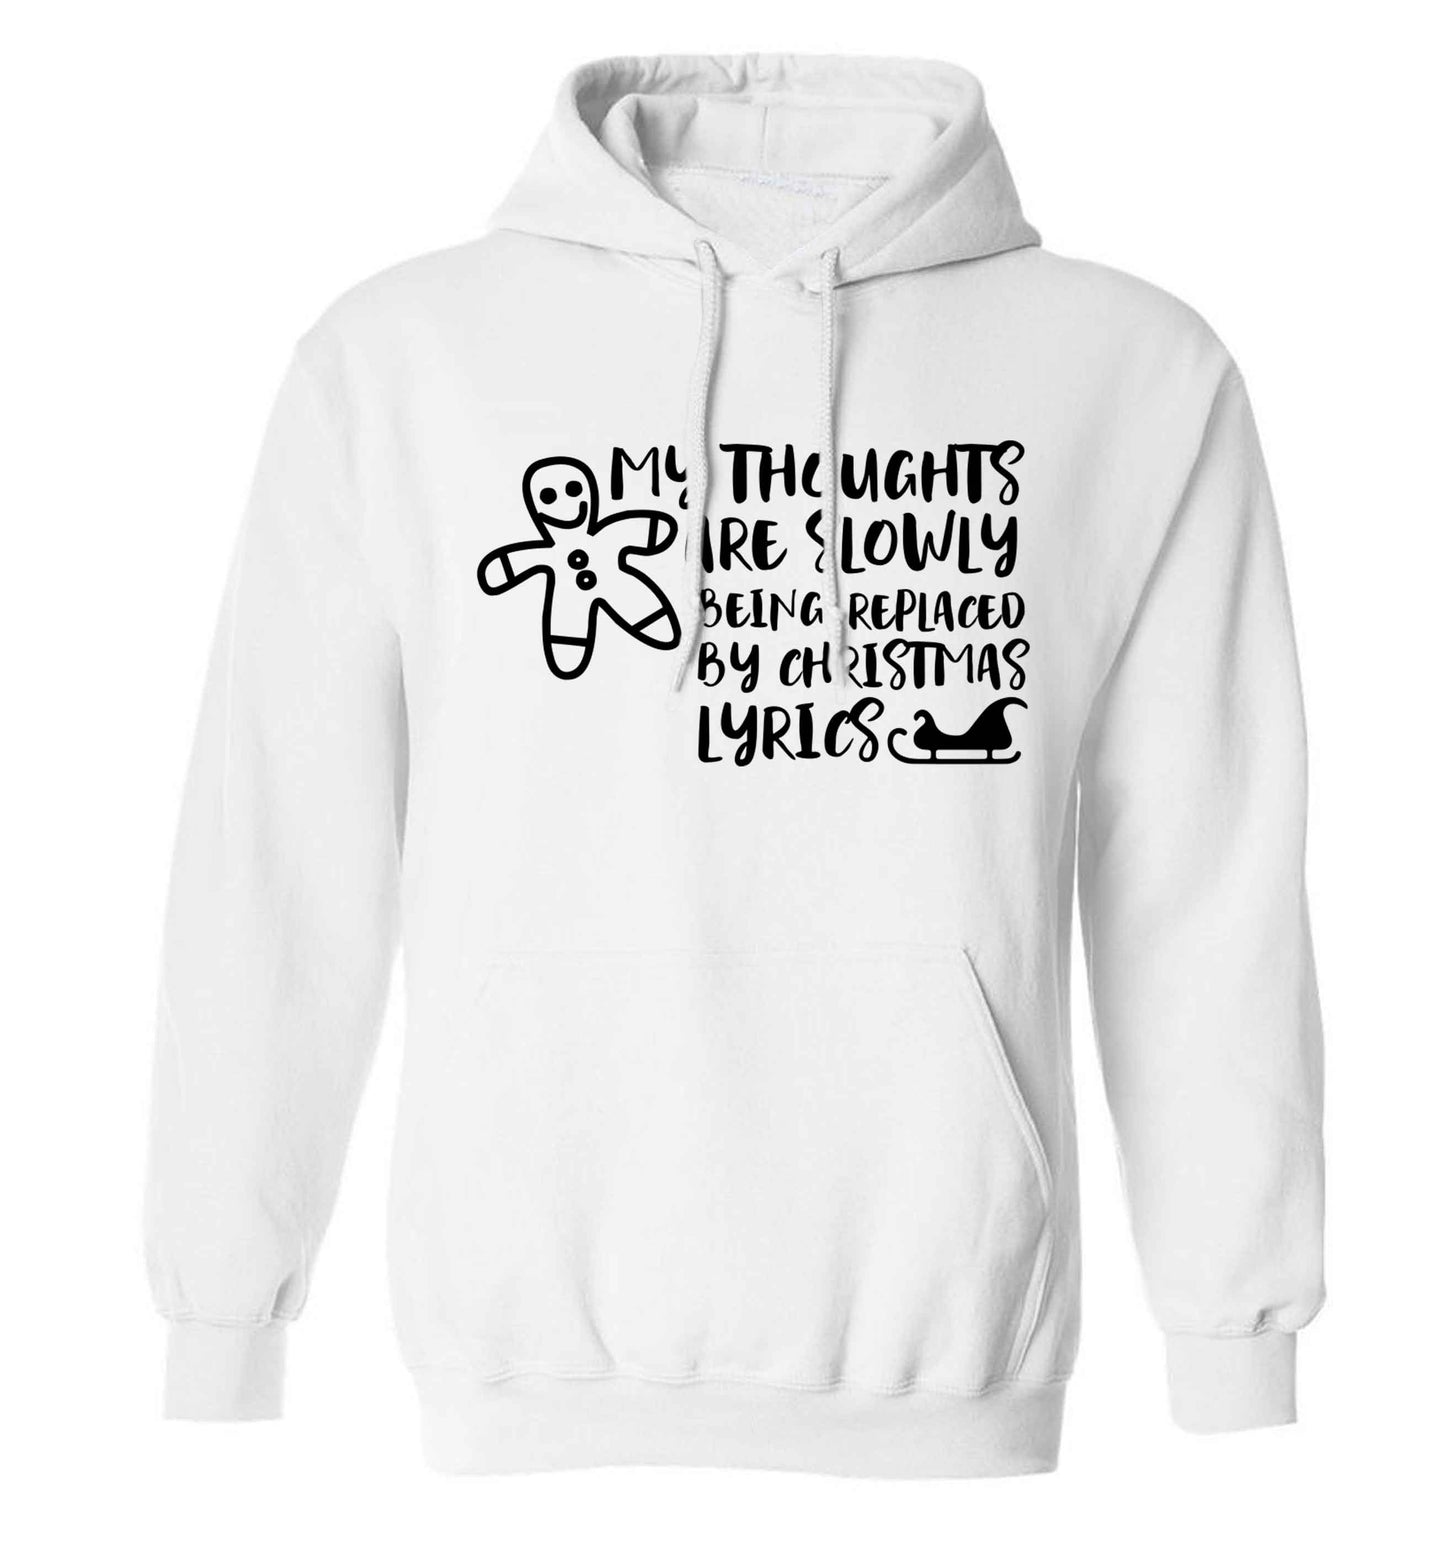 My thoughts are slowly being replaced by Christmas lyrics adults unisex white hoodie 2XL